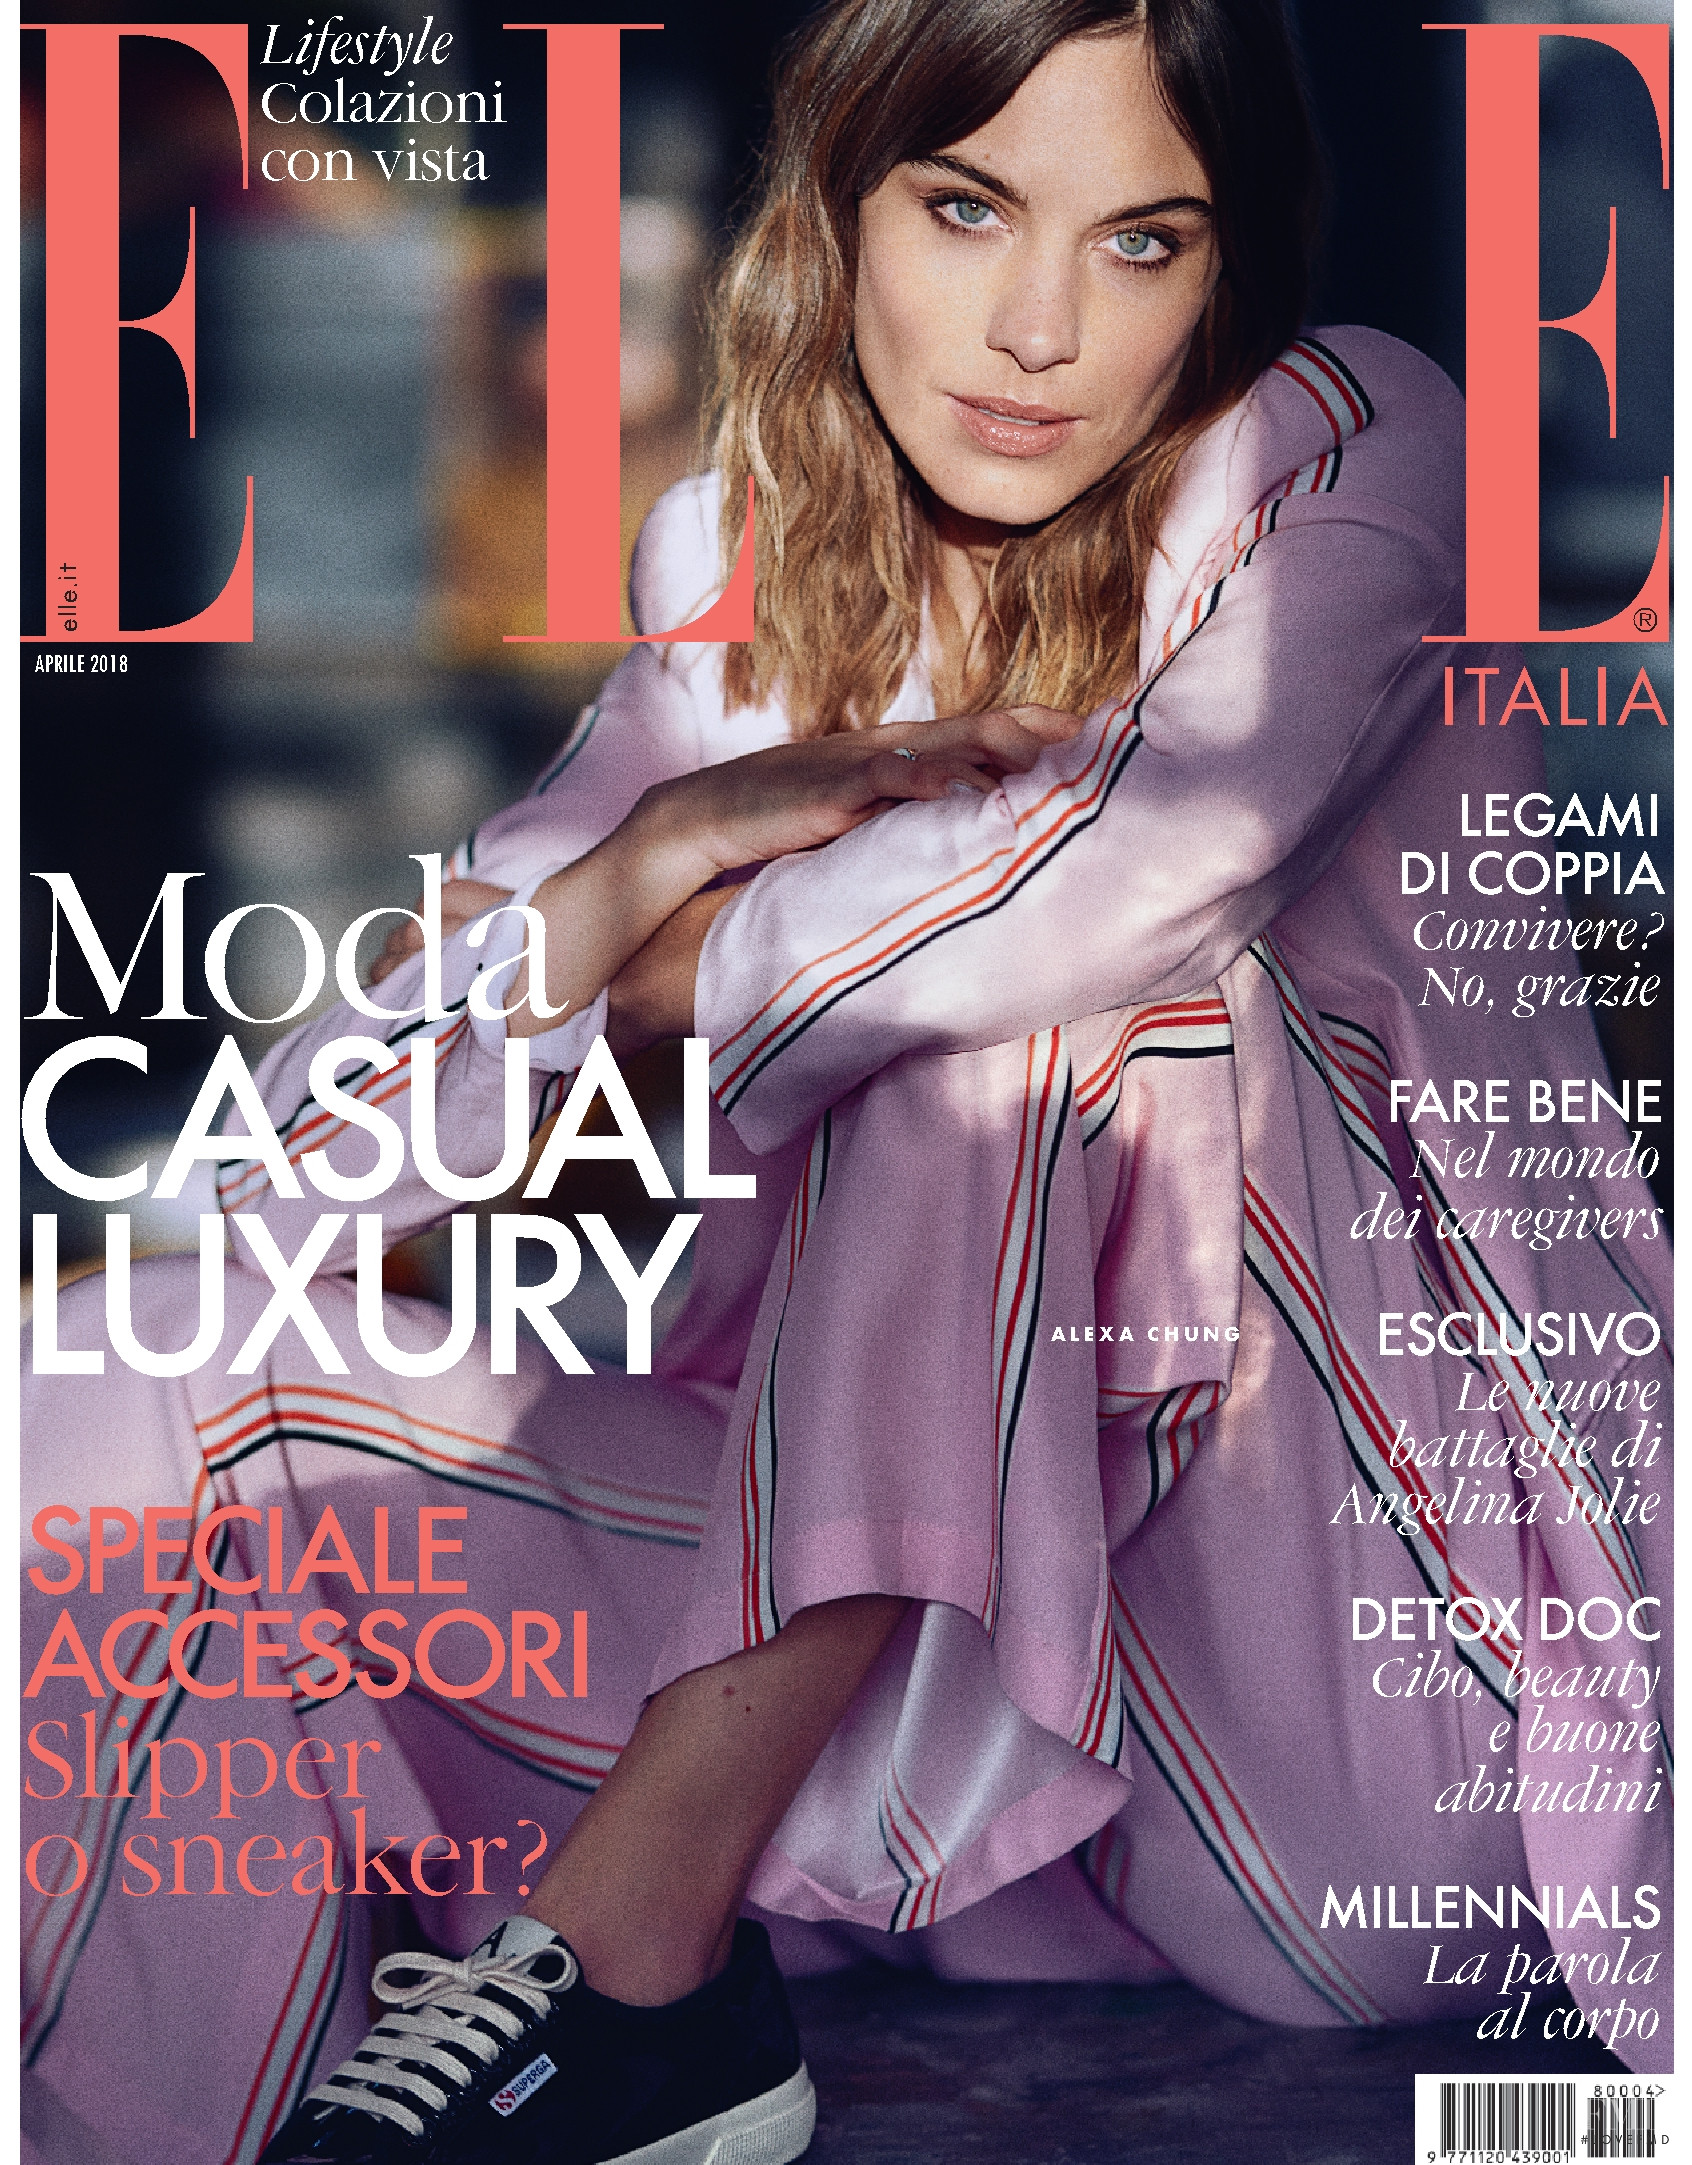 Cover of Elle Italy with Alexa Chung, April 2018 (ID:47025)| Magazines ...